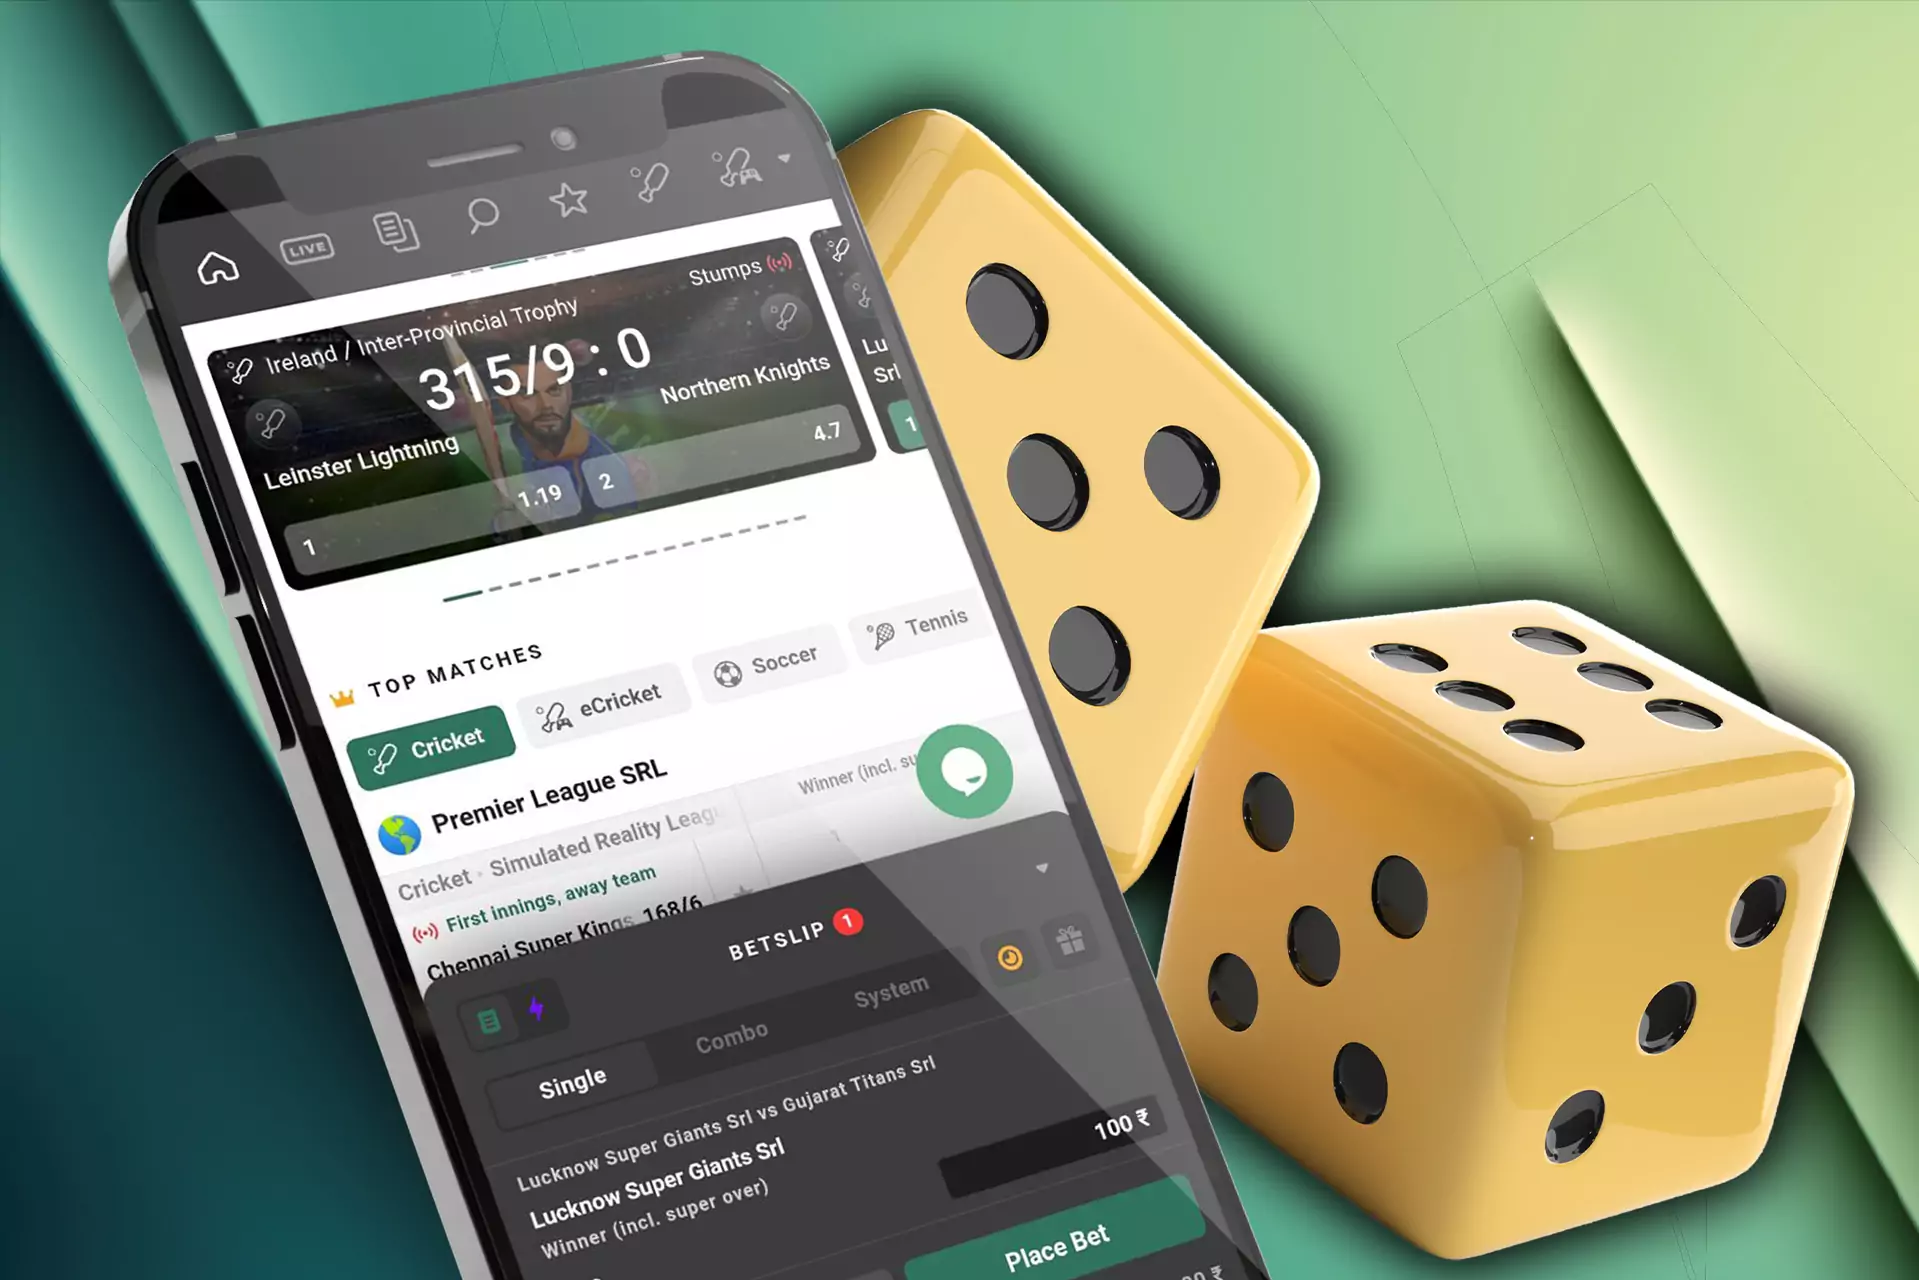 There are different types of sports betting available in the Rajbet app.